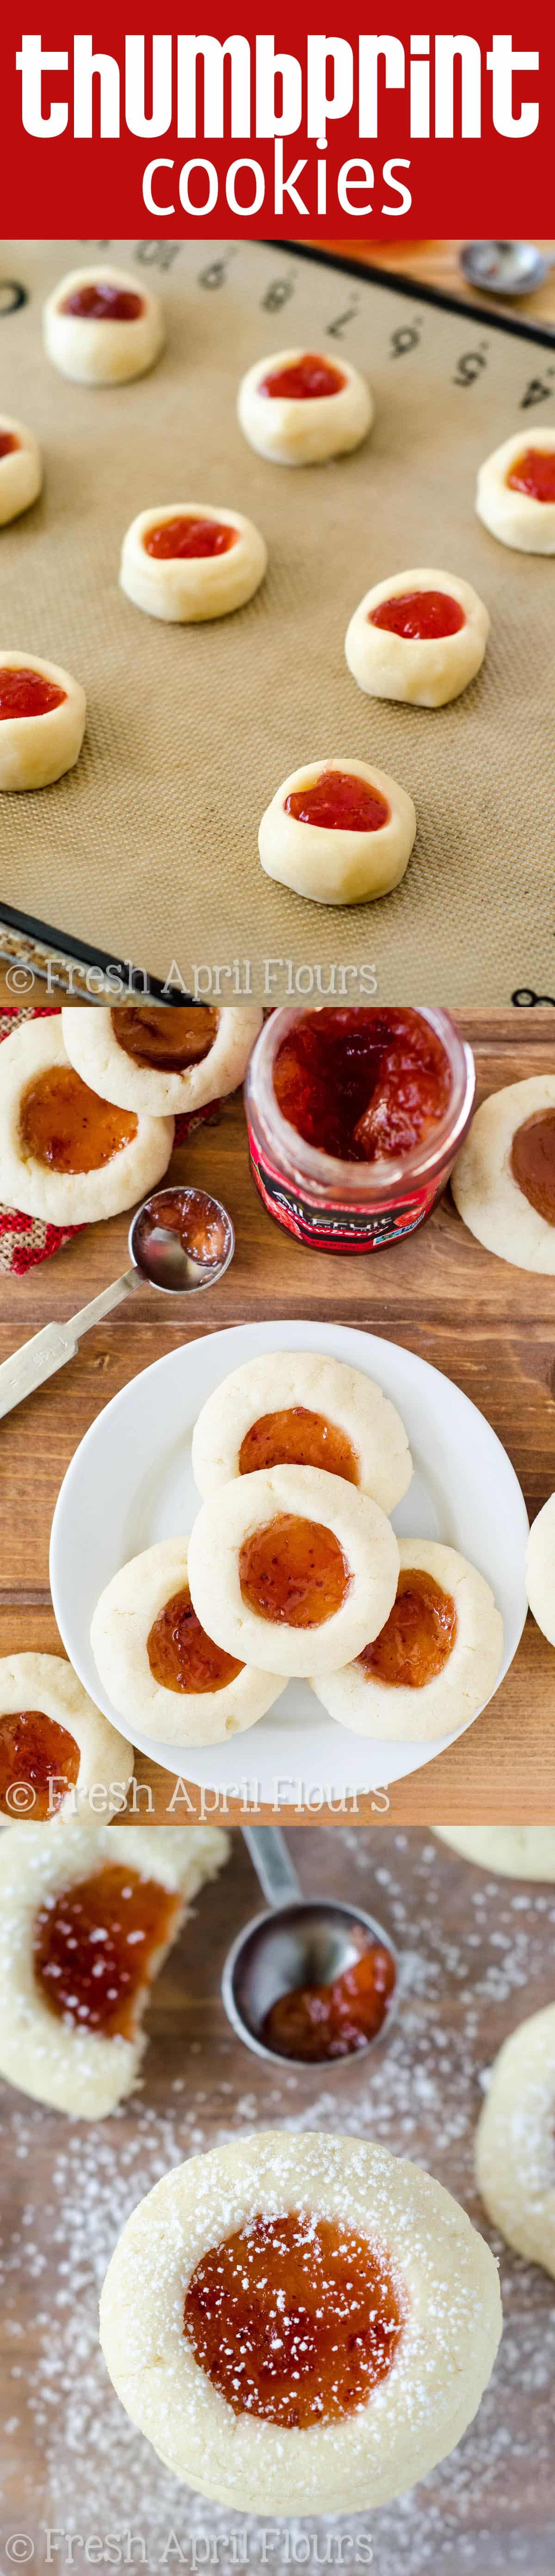 Buttery shortbread cookies filled with a fruity puddle of jam or jelly. via @frshaprilflours